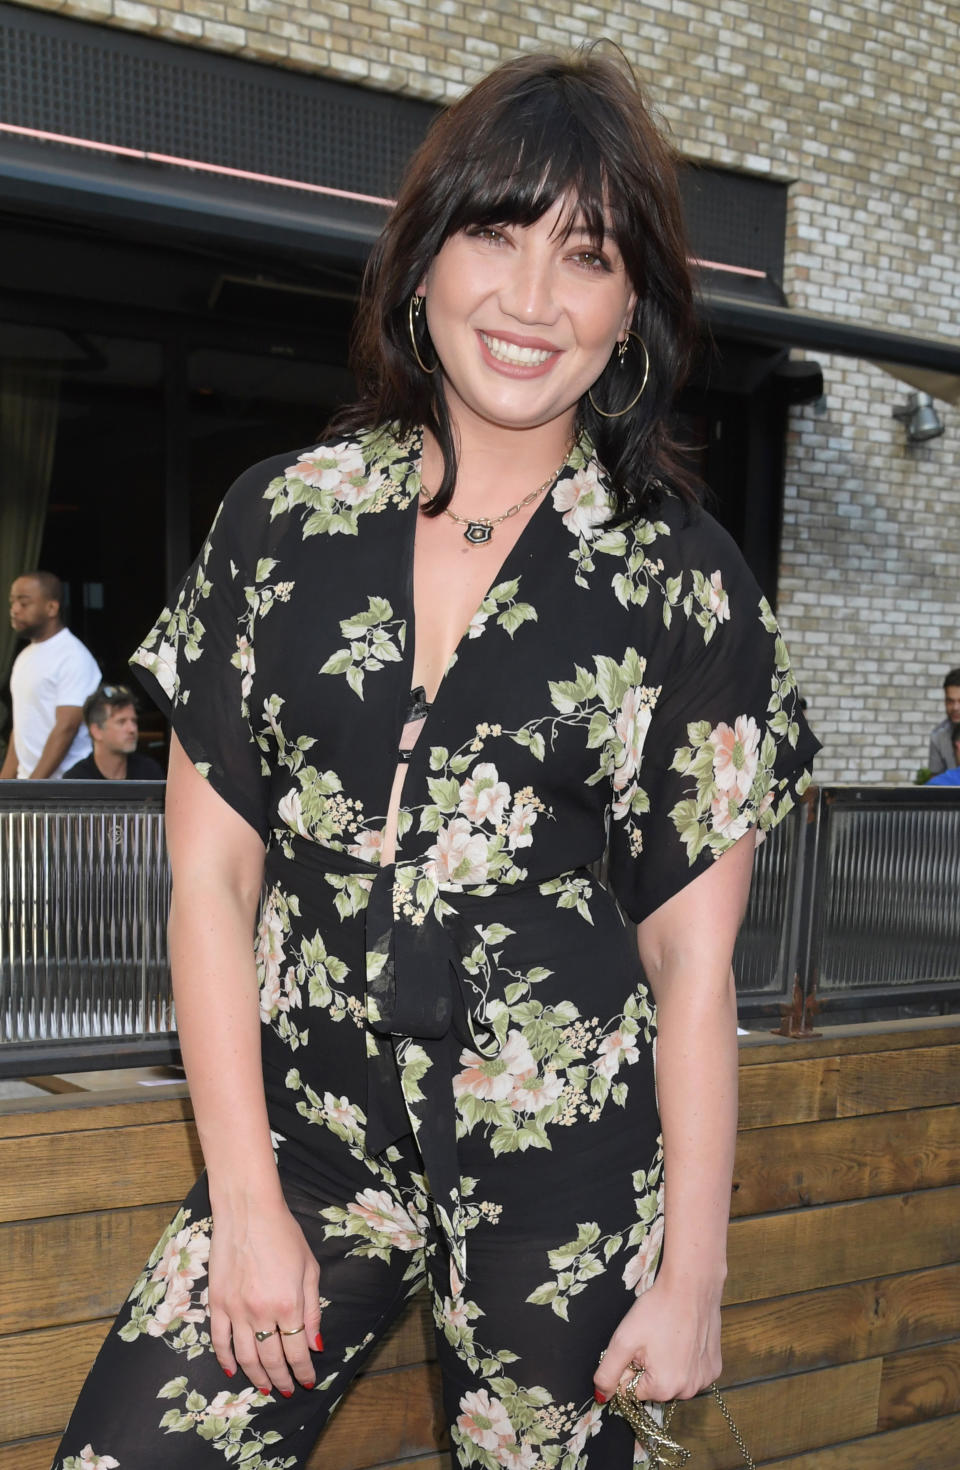 LONDON, ENGLAND - JULY 17:  Daisy Lowe attends the launch of Giz & Green Pizza Pies Pop-Up at Passo on July 17, 2020 in London, England. (Photo by David M. Benett/Dave Benett/Getty Images for PASSO)